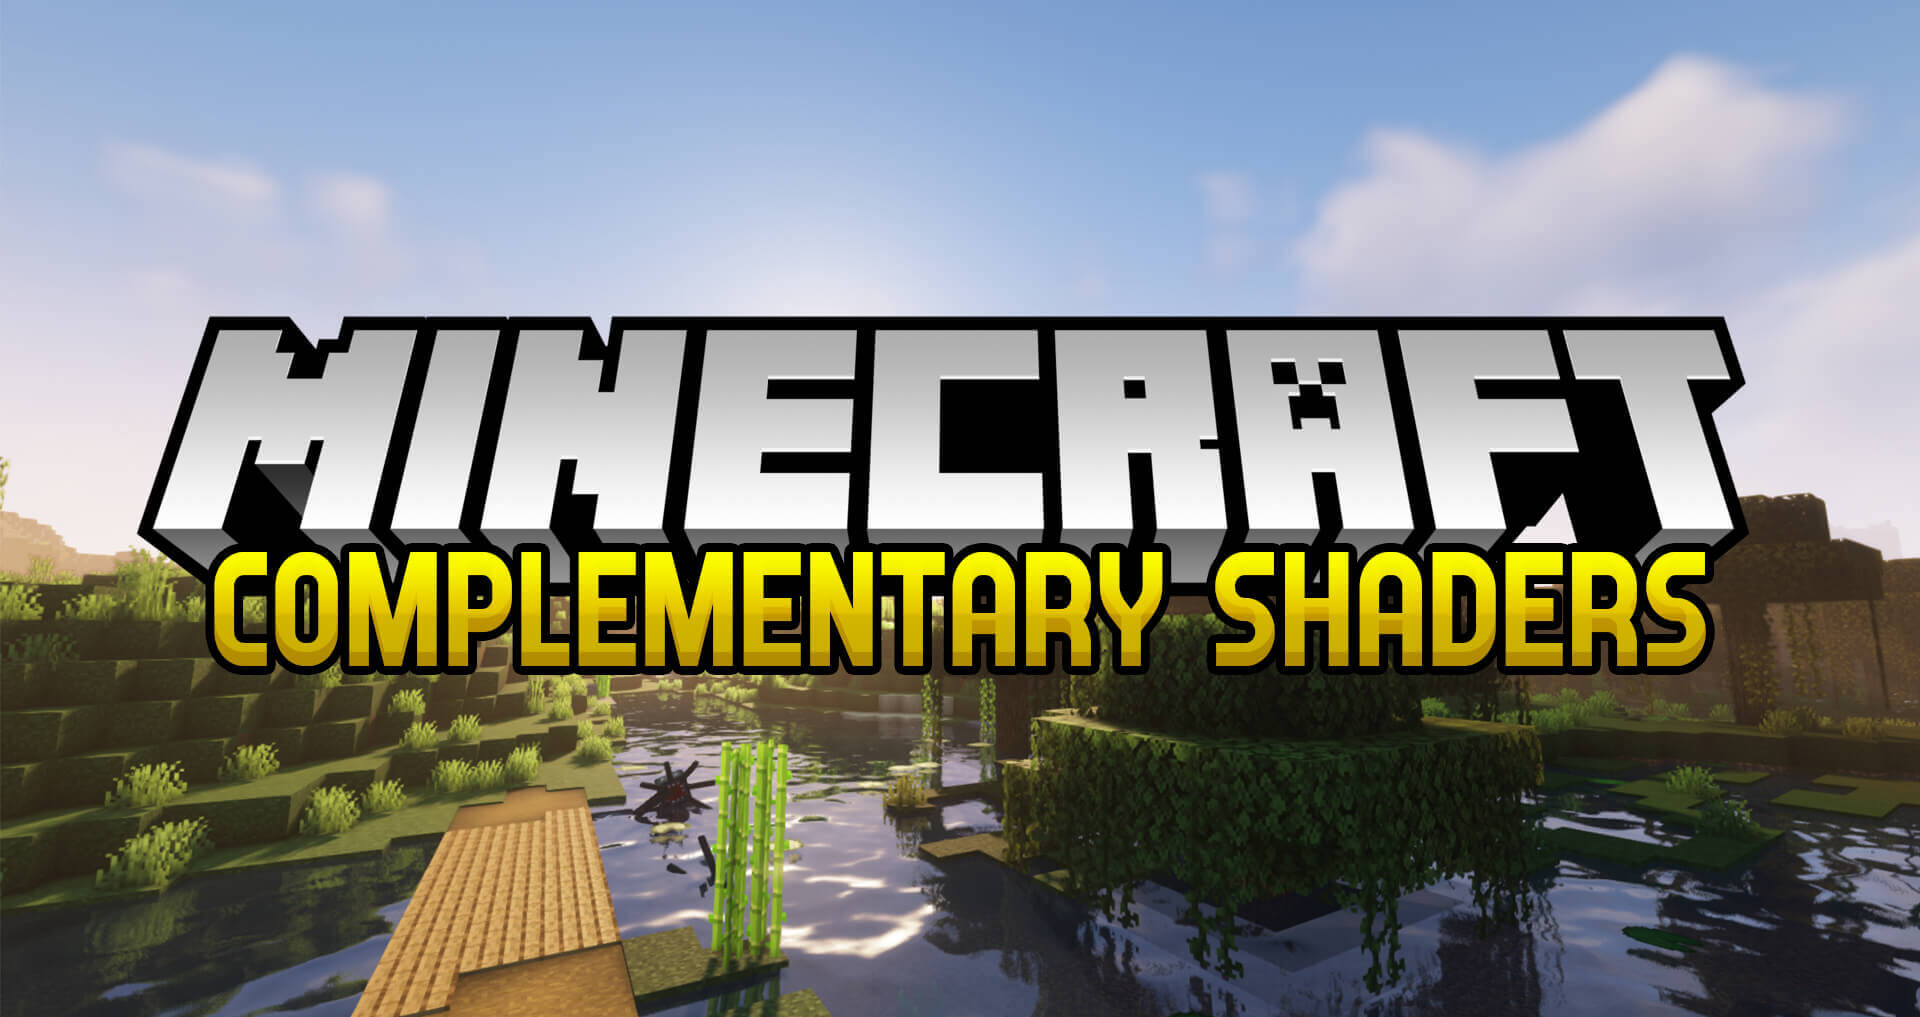 Complementary Shaders 1 18 1 1 7 10 Download Shader Pack For Minecraft